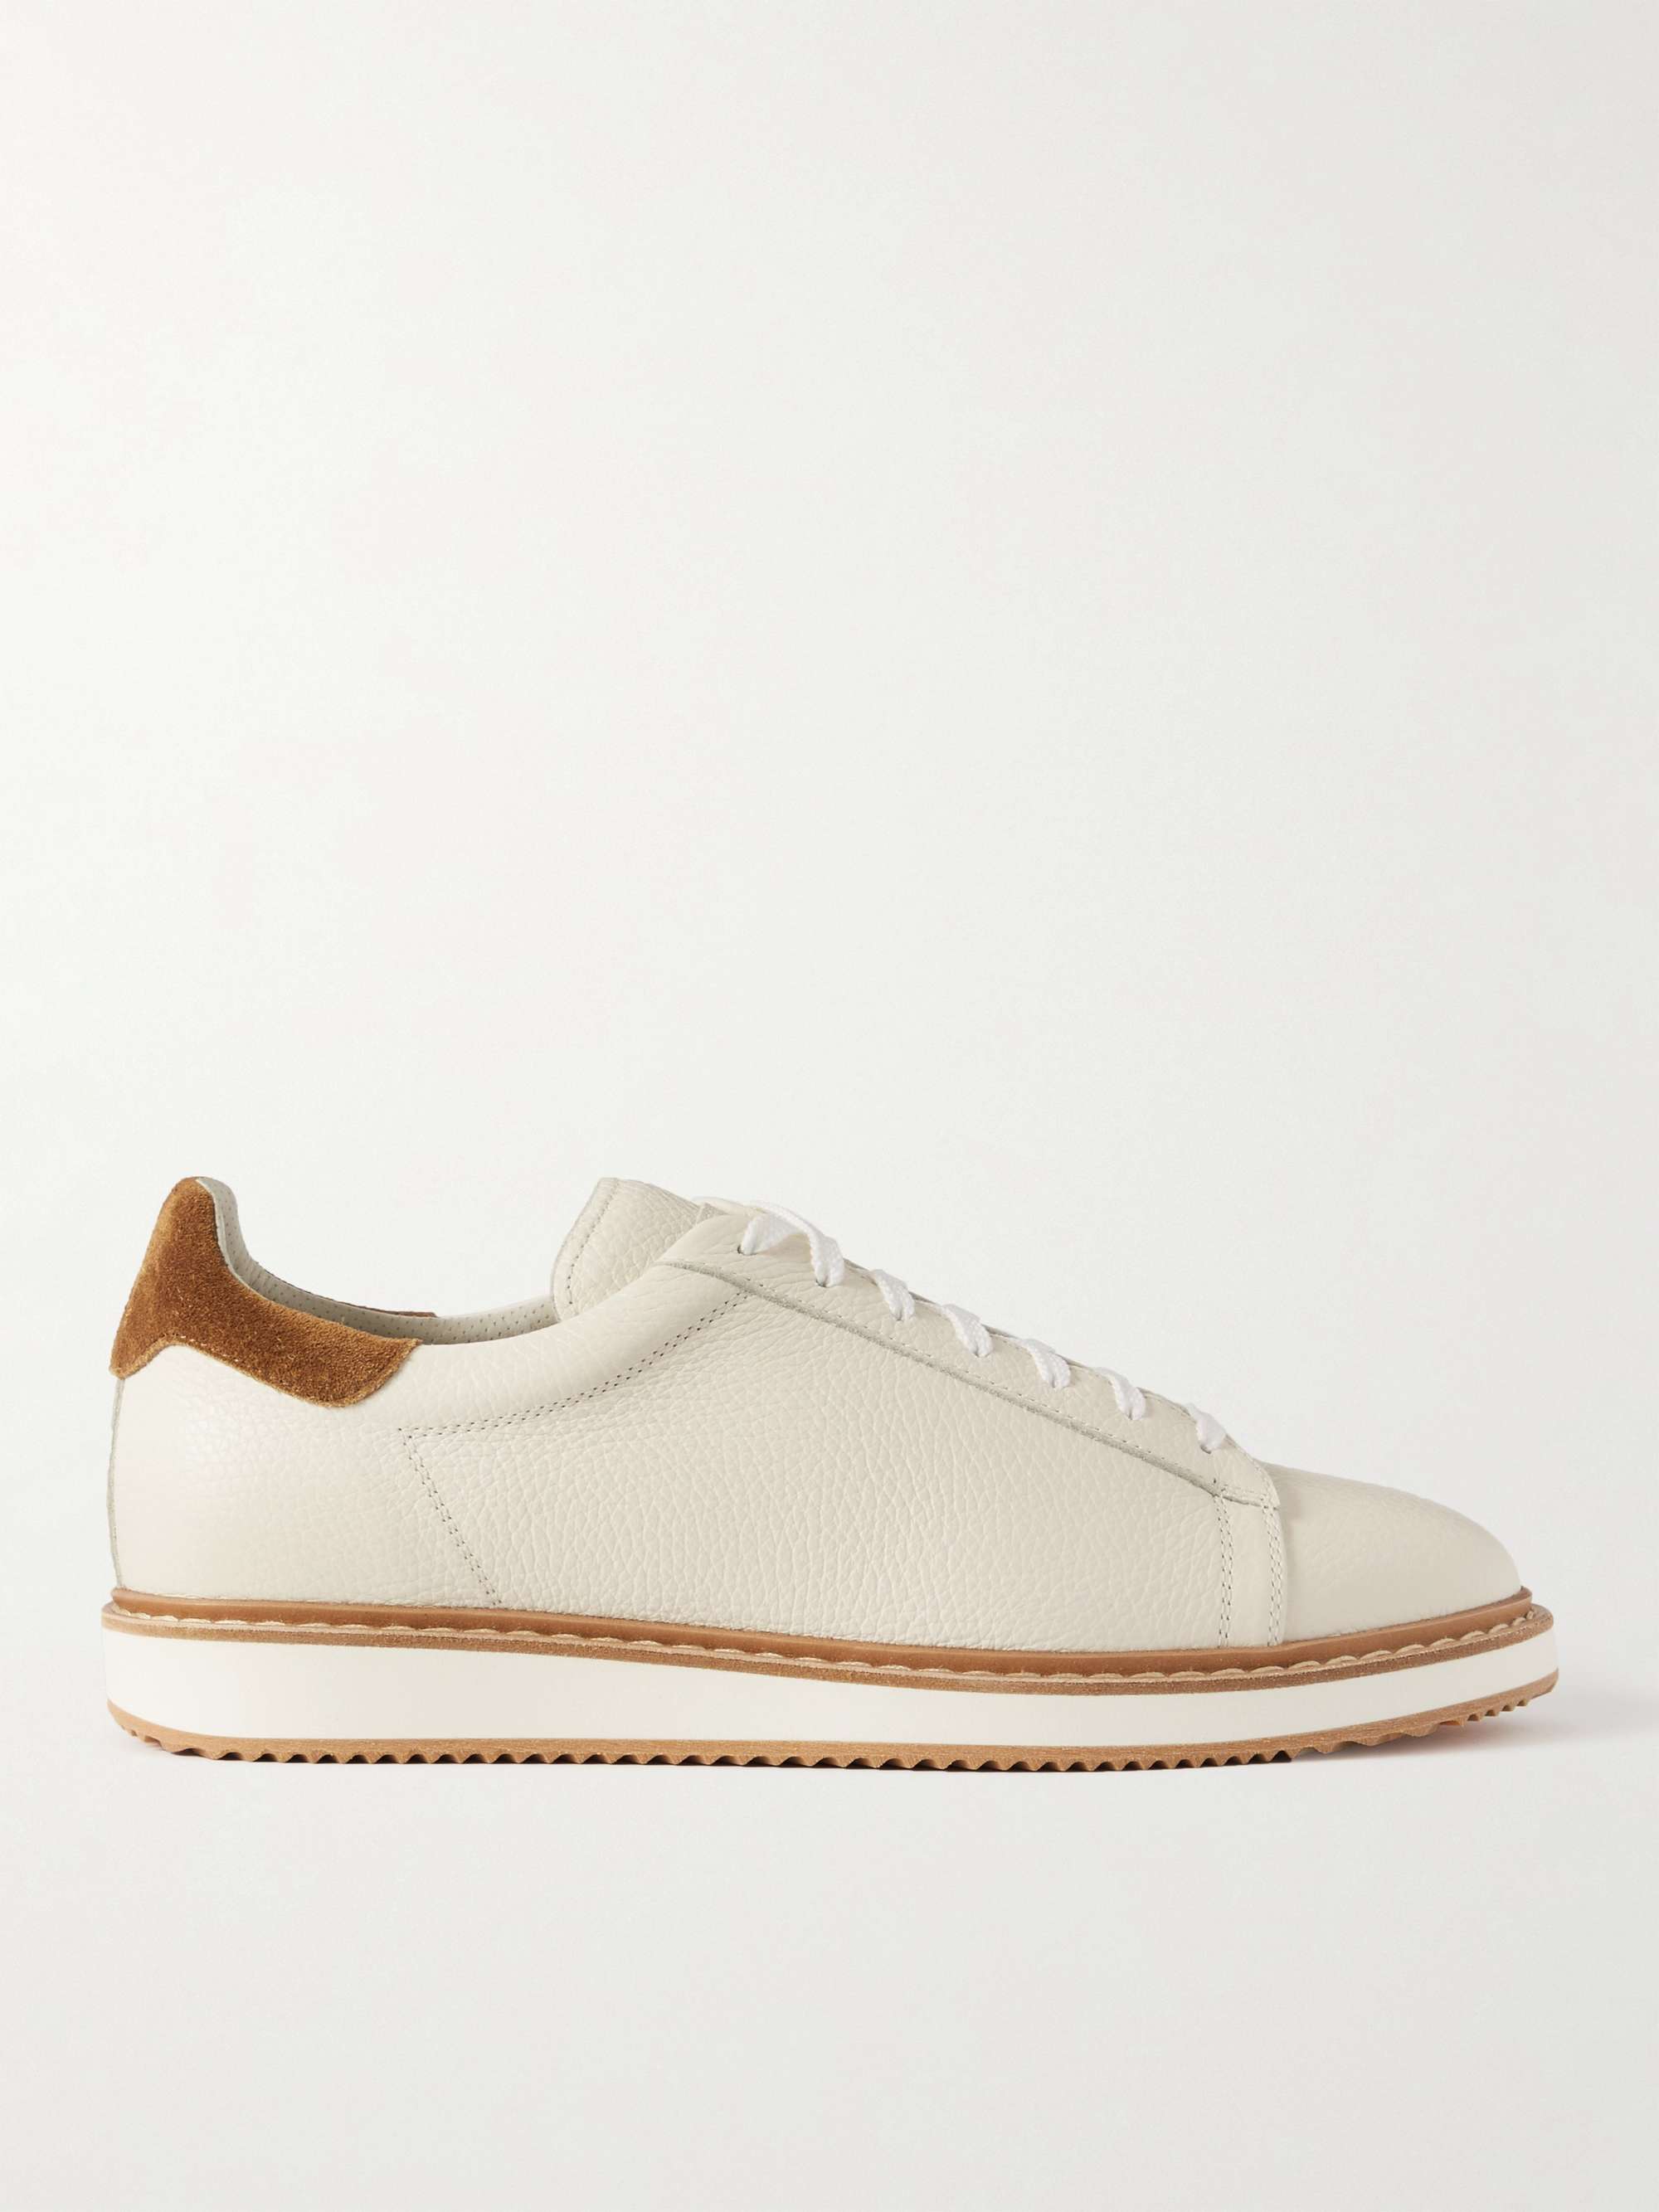 Brunello Cucinelli Suede-Trimmed Full-Grain Leather Sneakers - Men - White Suede Shoes - EU 42.5